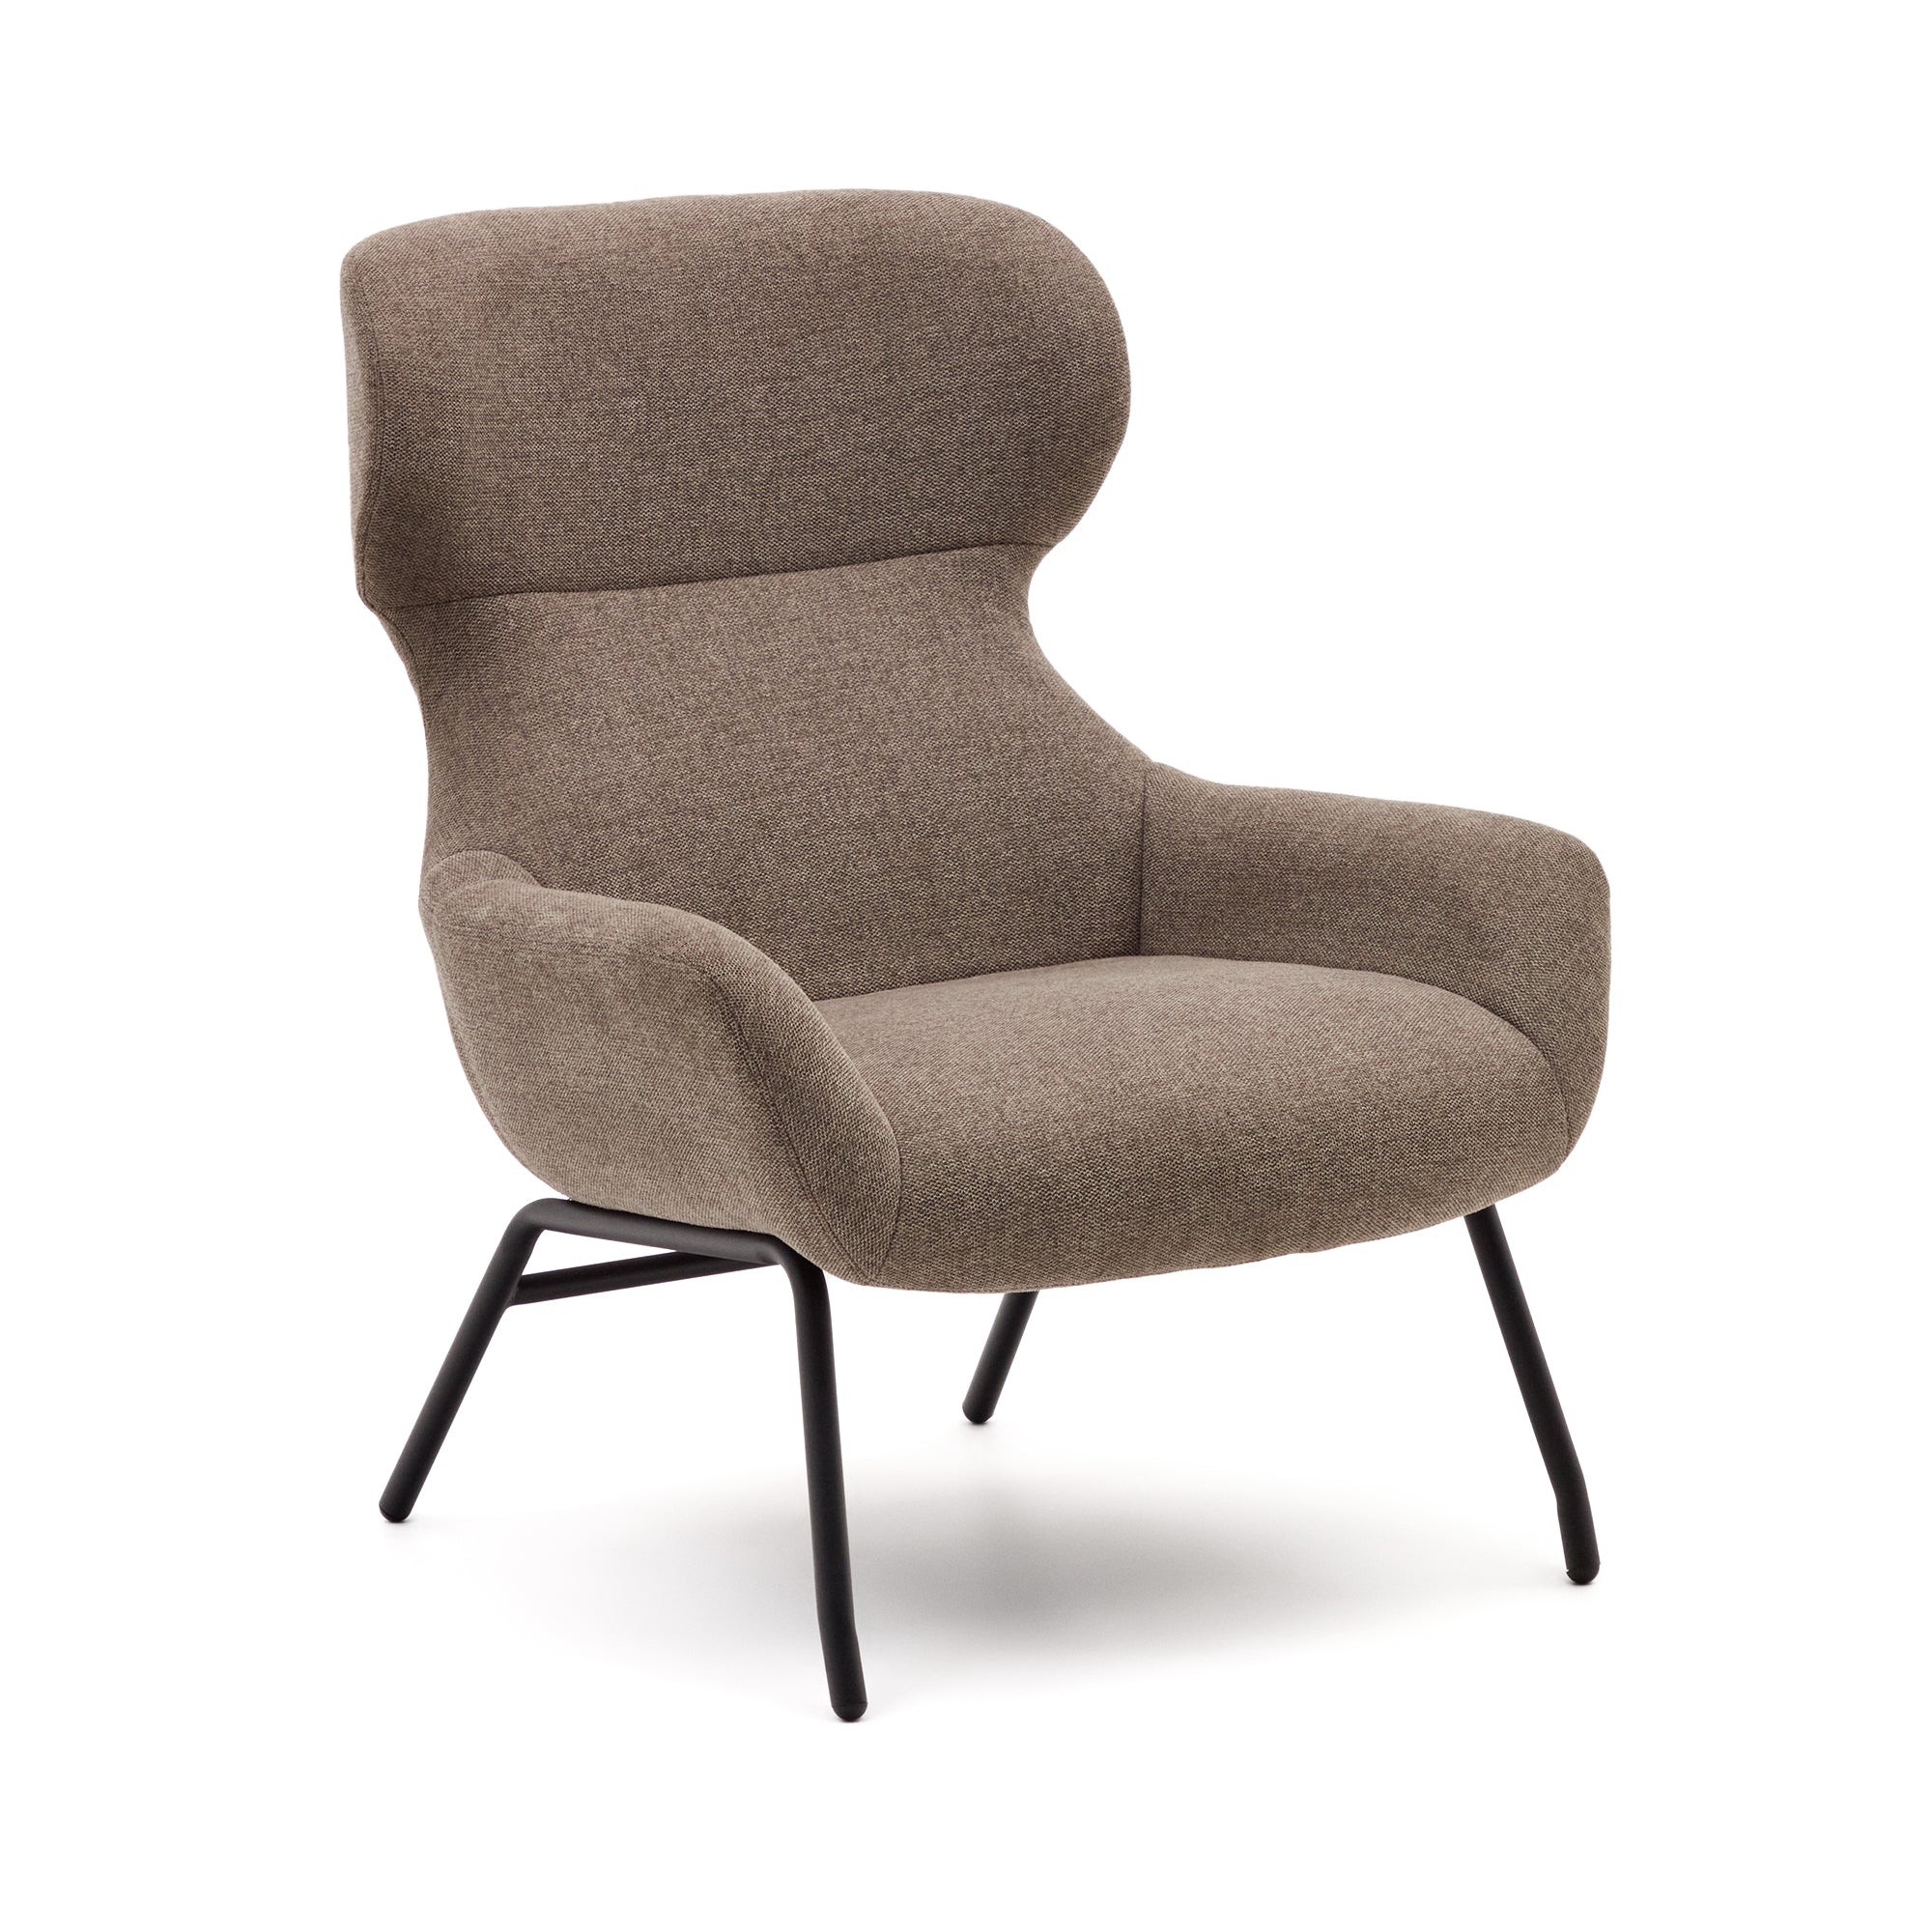 Belina chenille armchair in light brown and steel with black finish